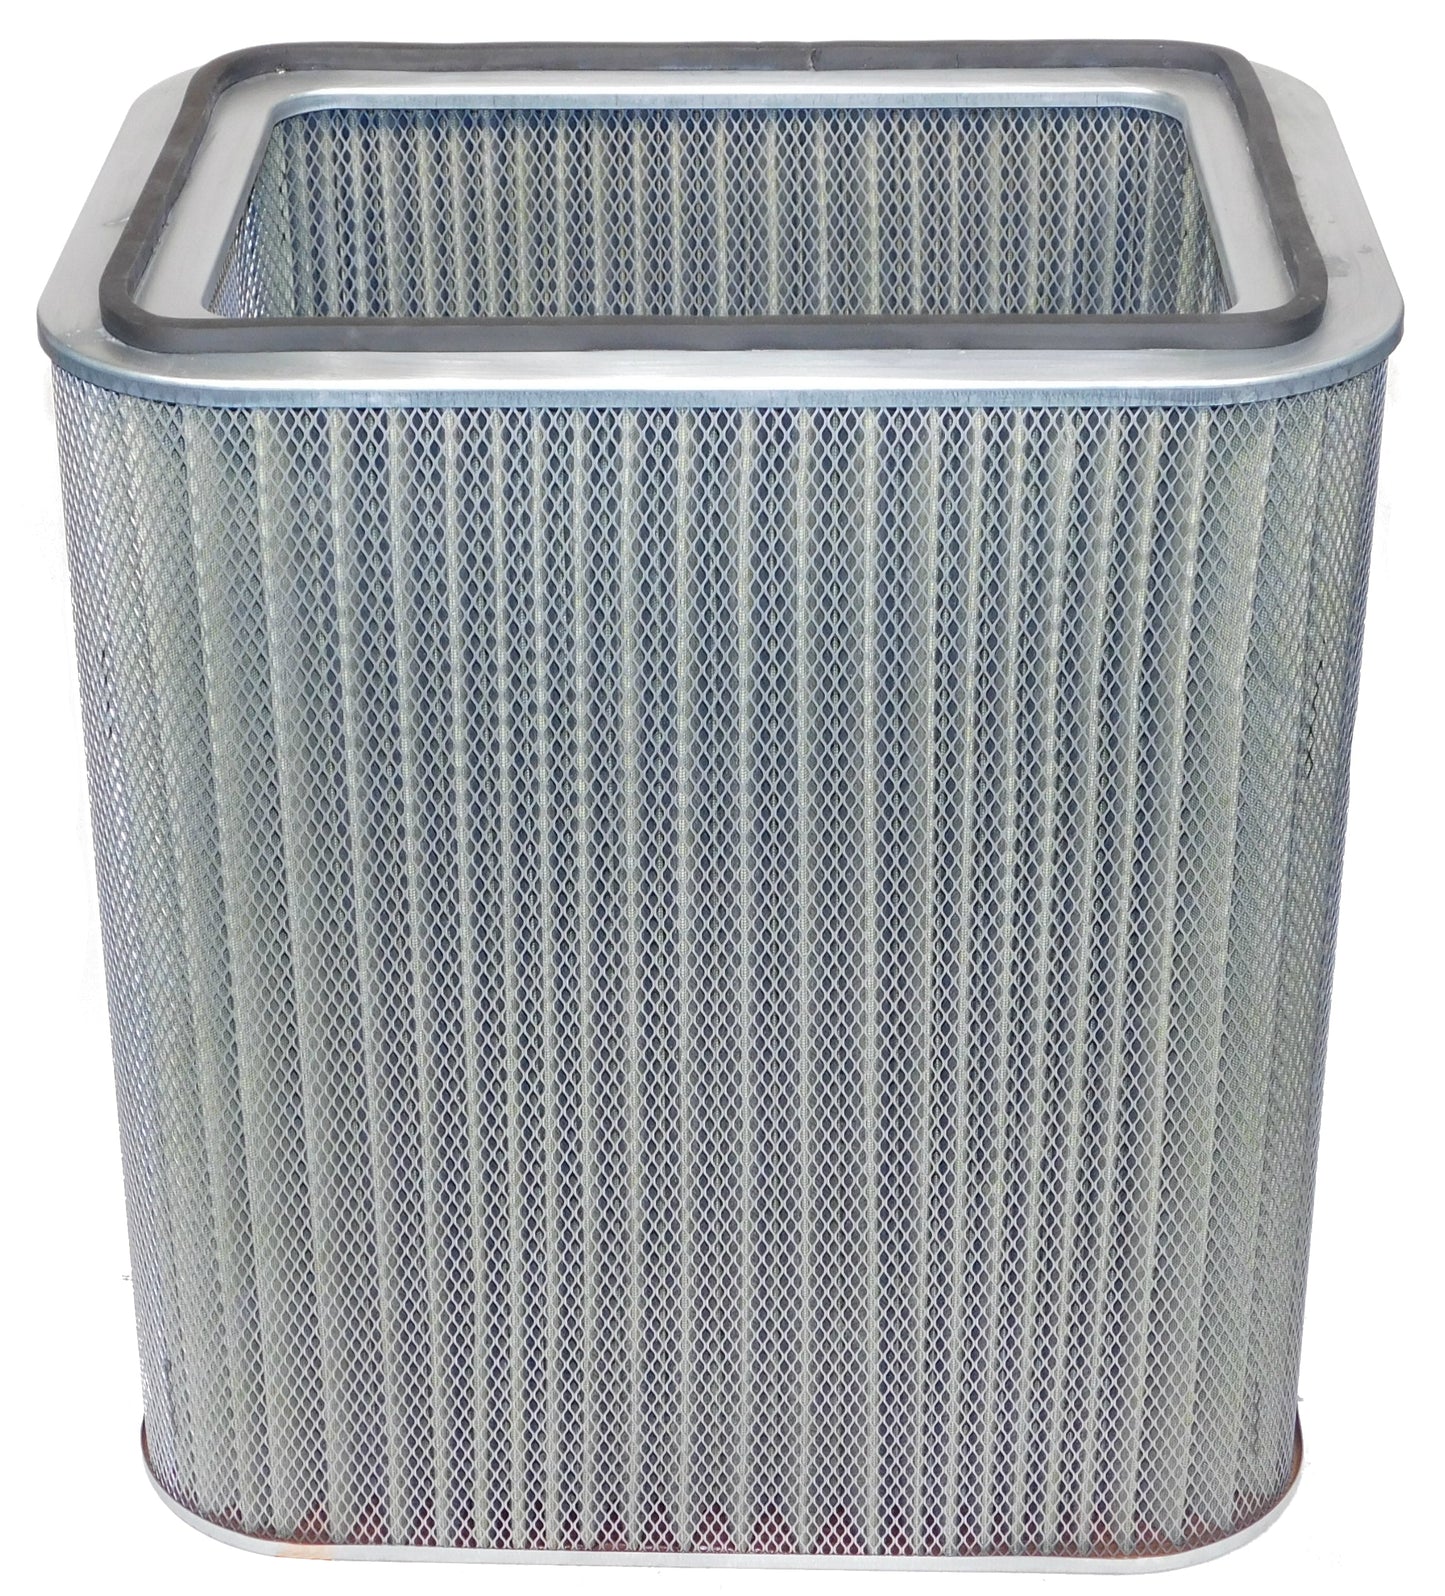 P031728-016-340 - Replacement for Torit filter